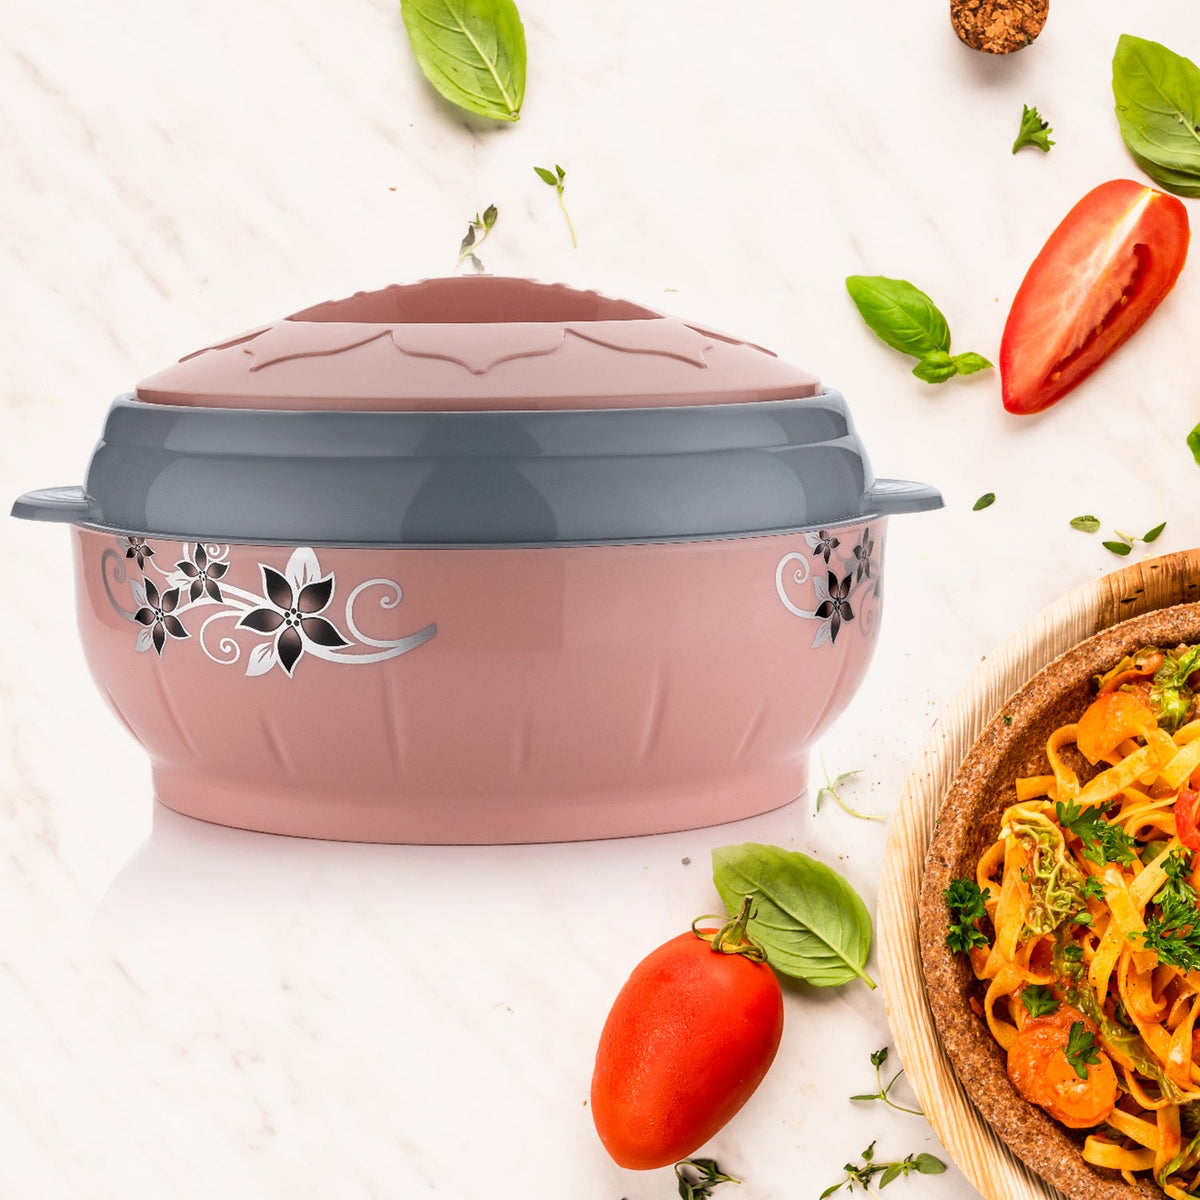 5788 High Quality Steel Casserole Box for Food Searving Inner Steel Insulated Casserole Hot Pot Flowers Printed Chapati Box for Roti Kitchen (Approx 4500 ml)